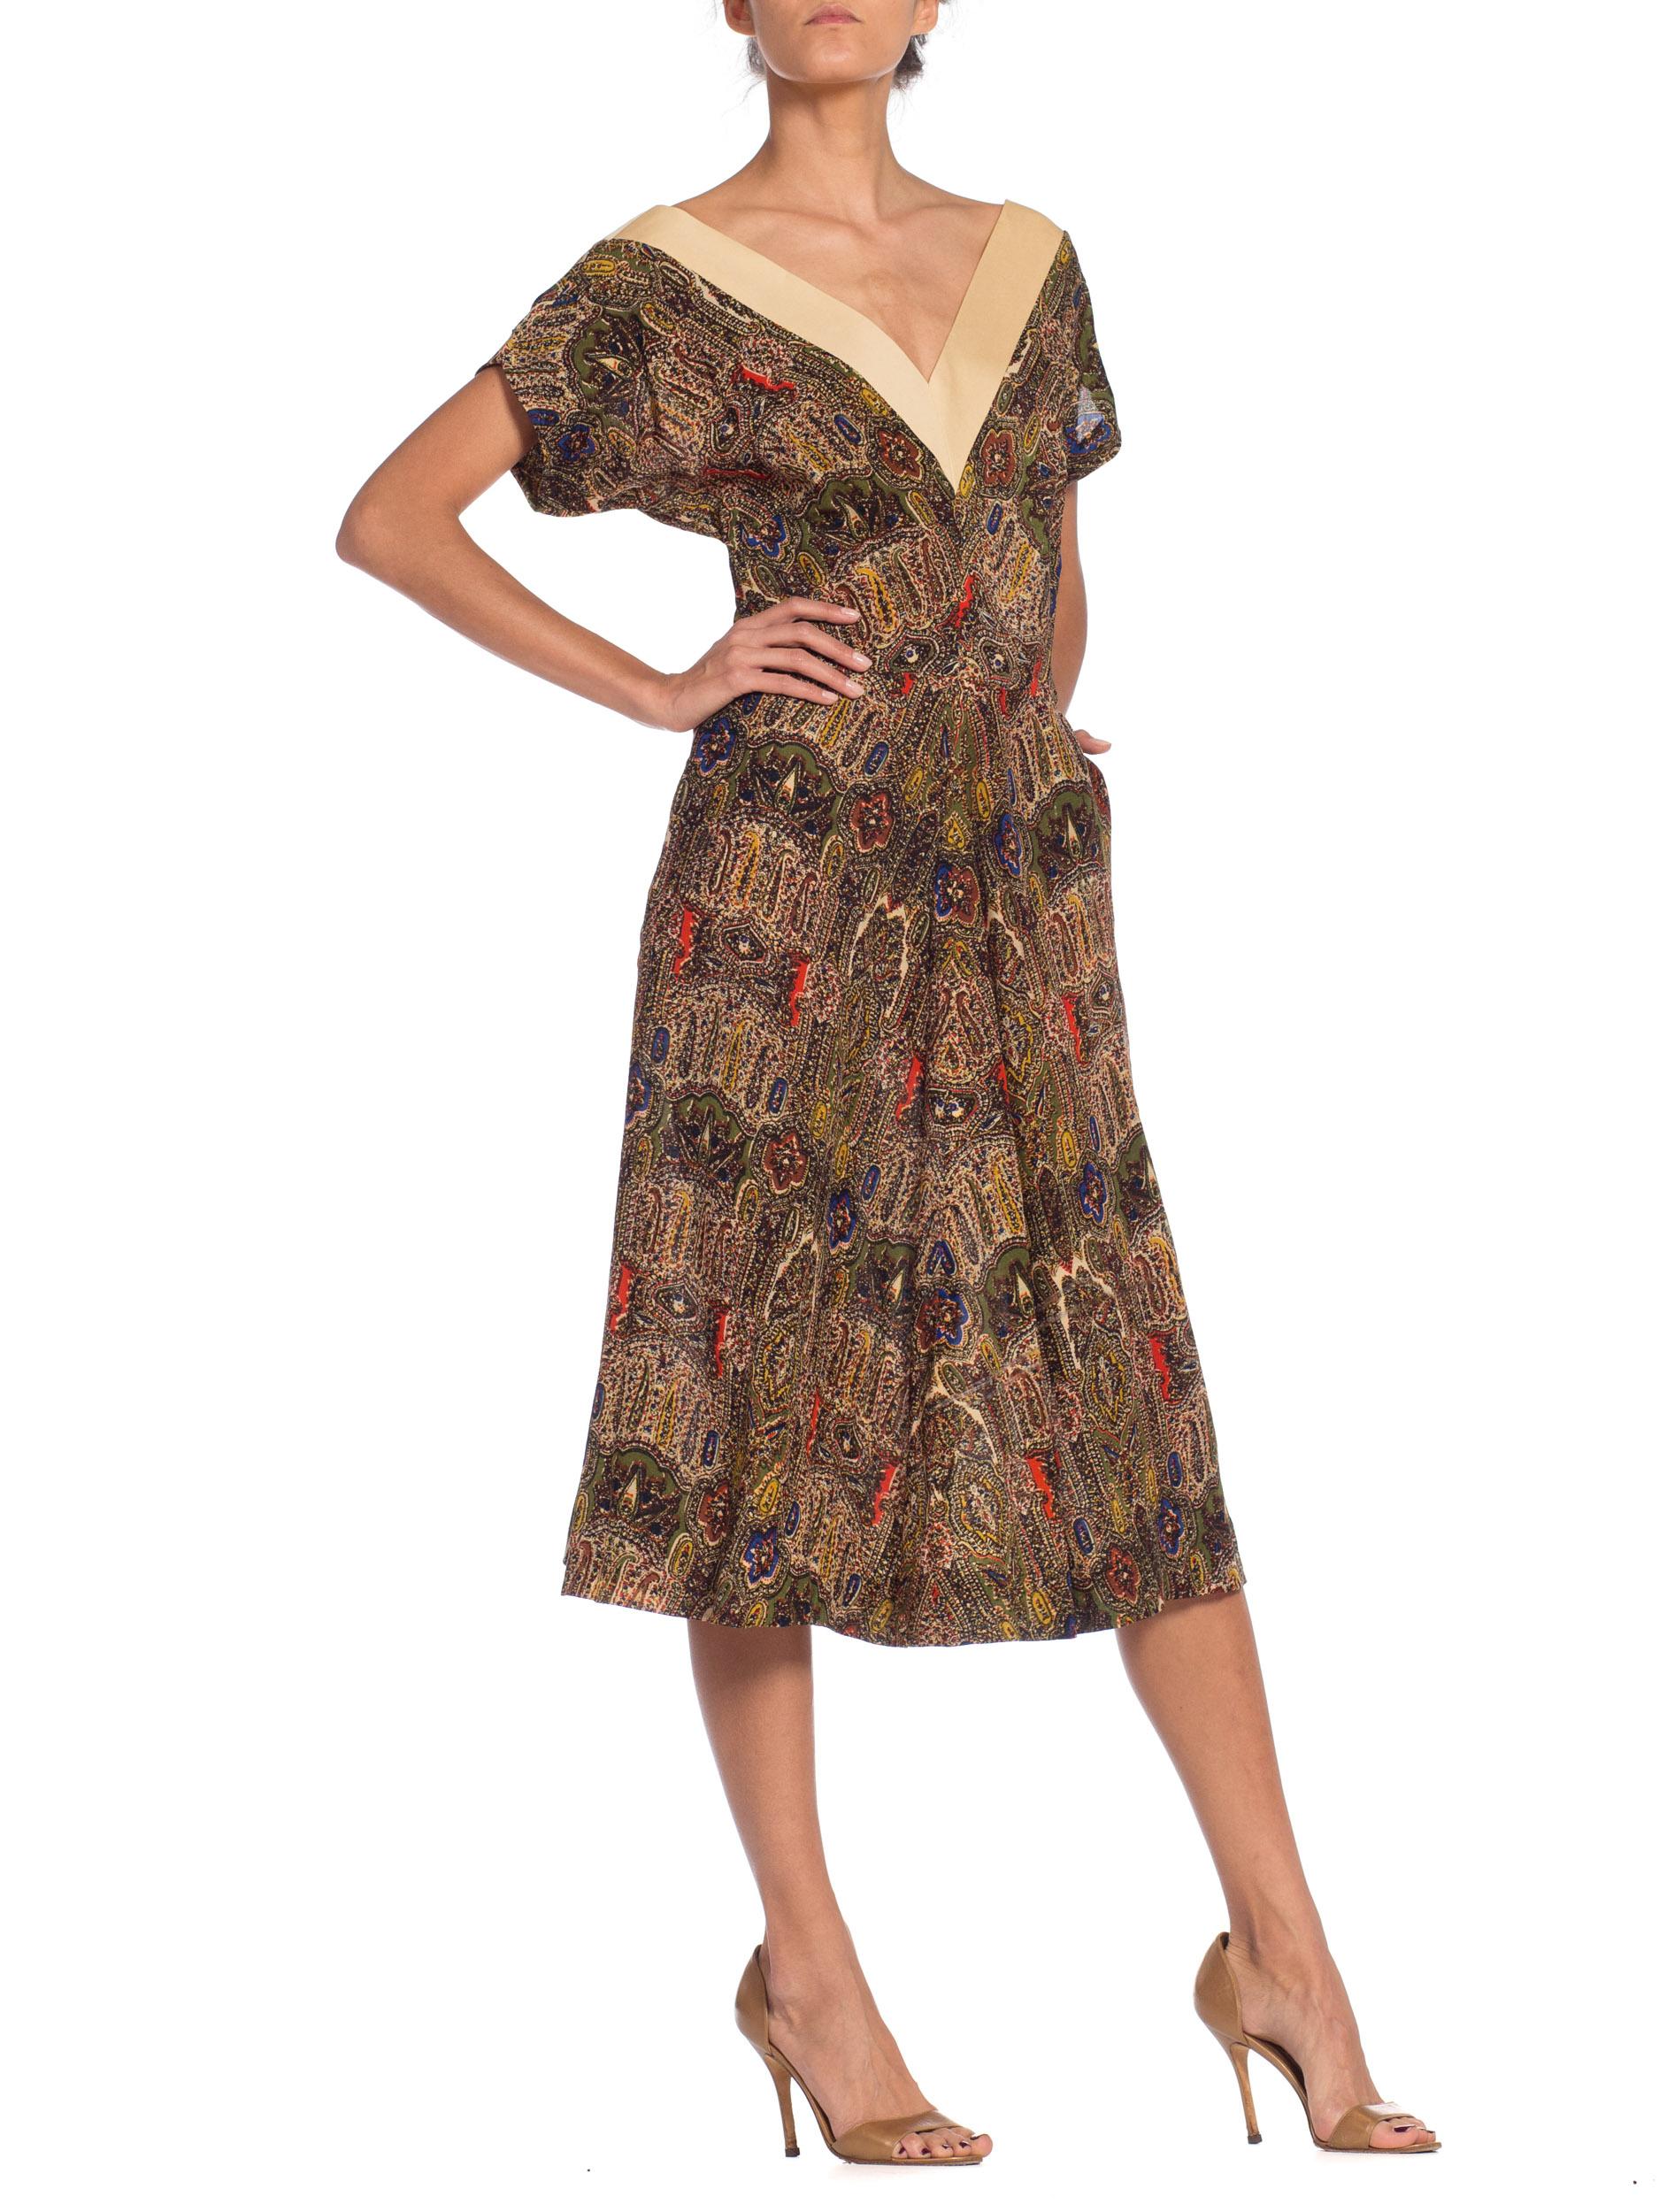 1950S CLAIRE MC CARDELL Multicolor Paisley Wool Day Dress 3